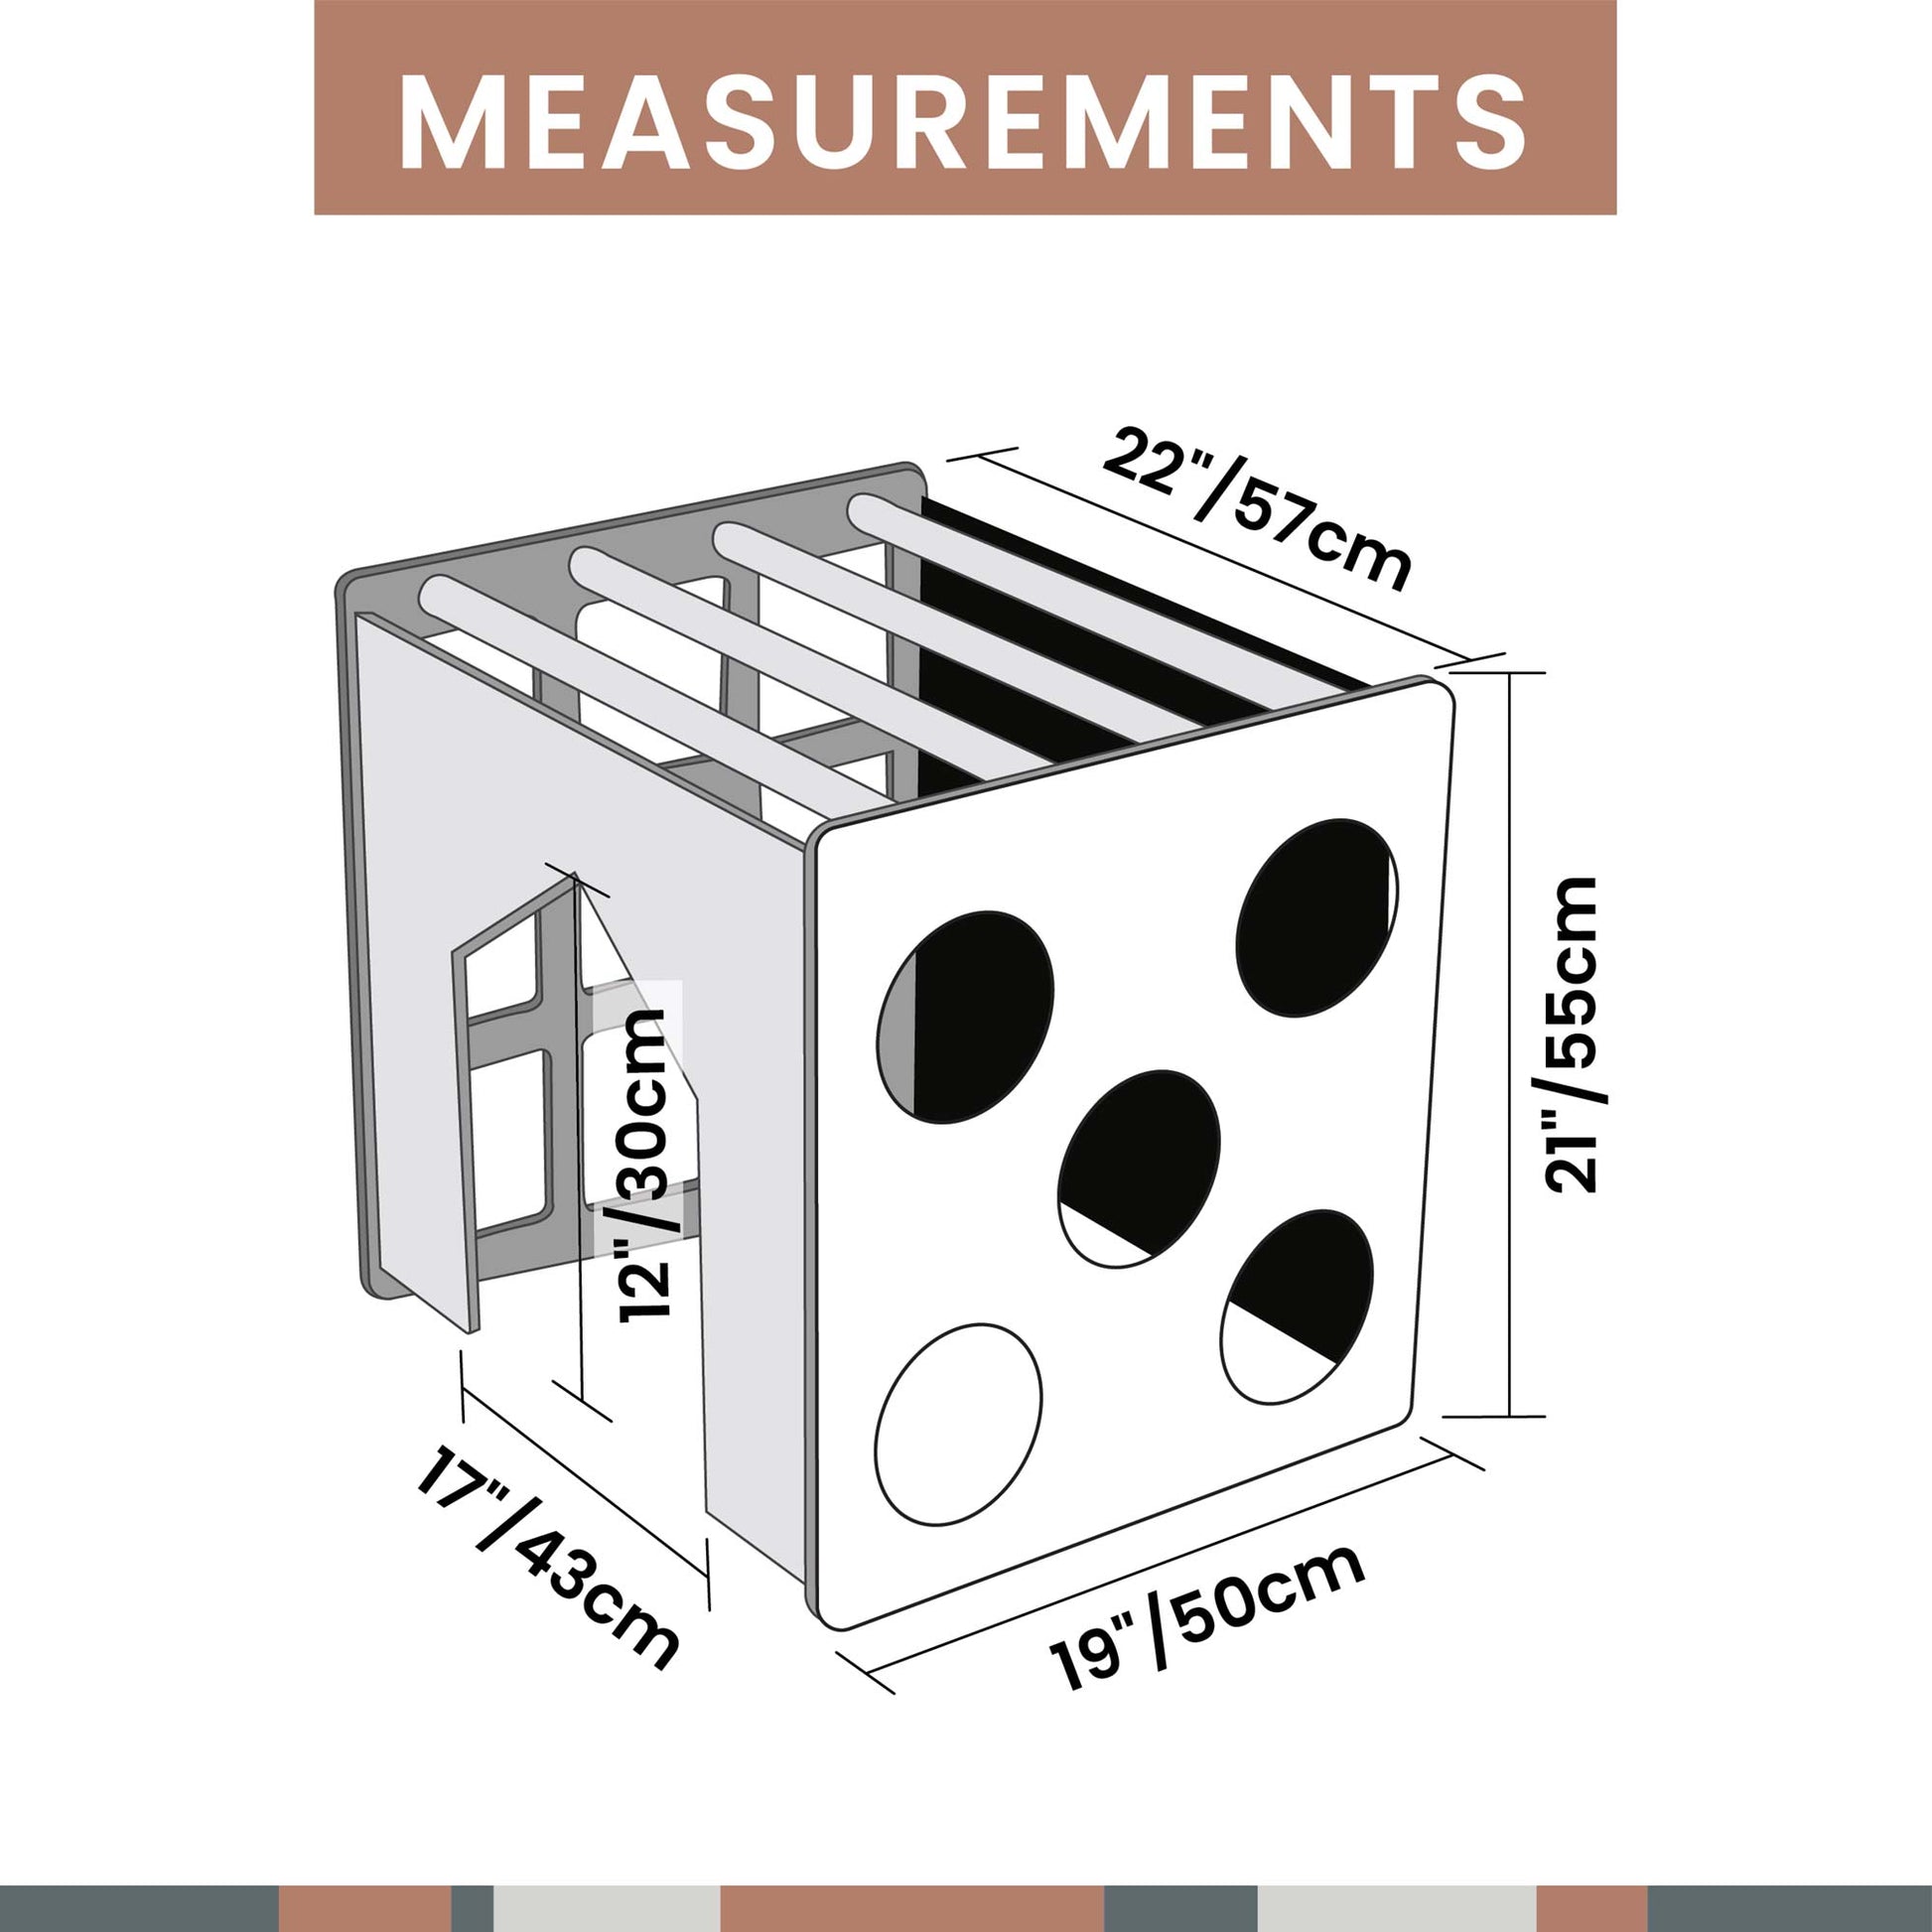 A diagram showing the measurements of the Sweet Home From Wood activity cube with sensory panels.